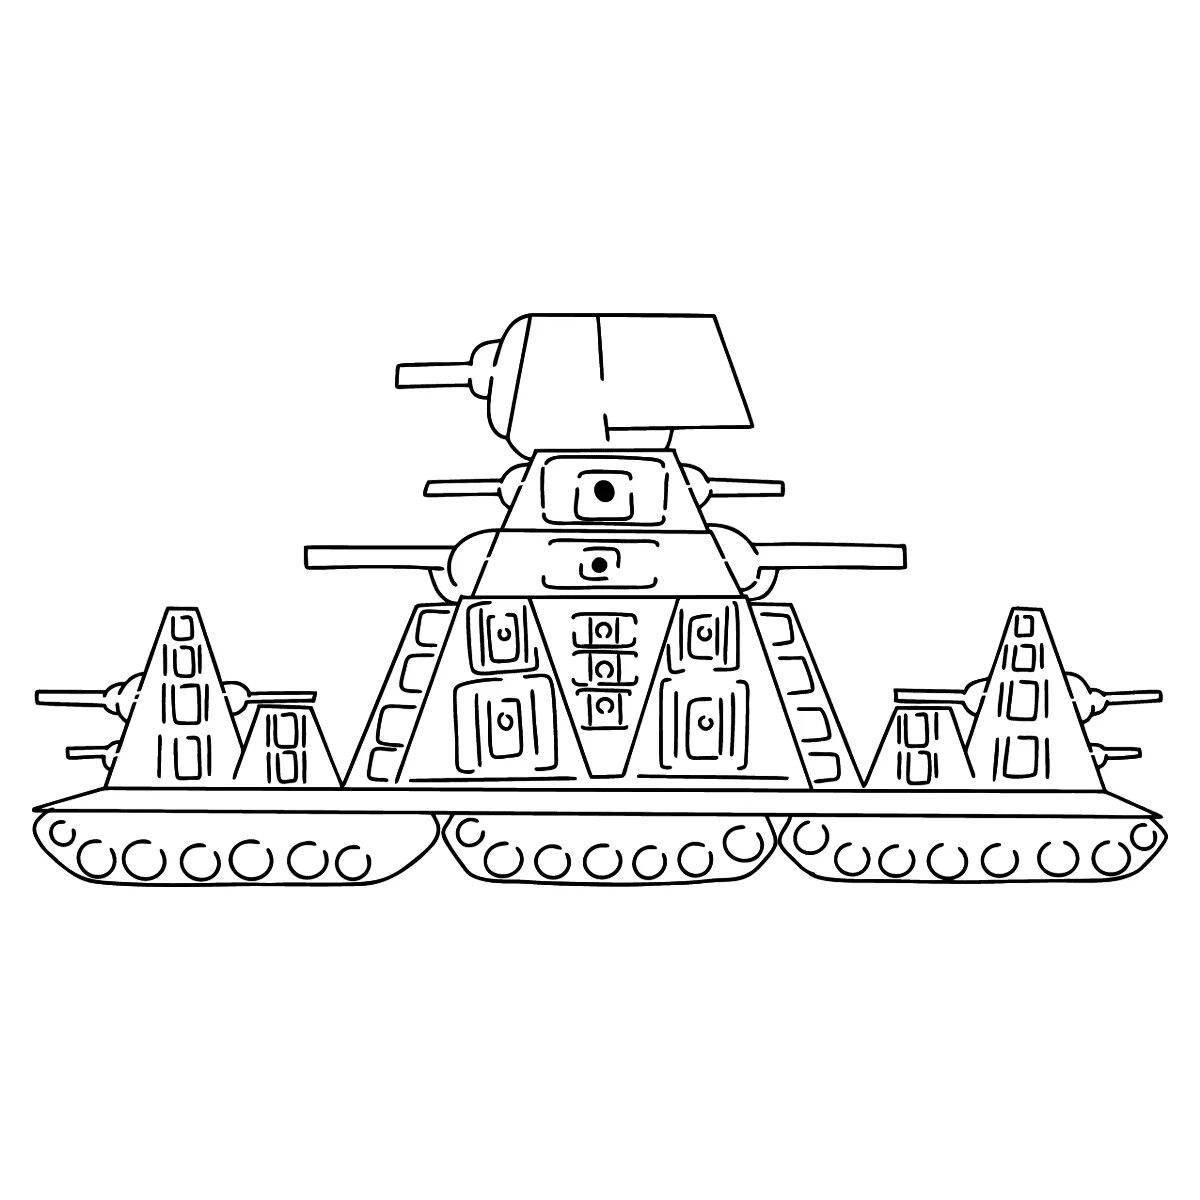 Amazing cartoon tank coloring pages for kids